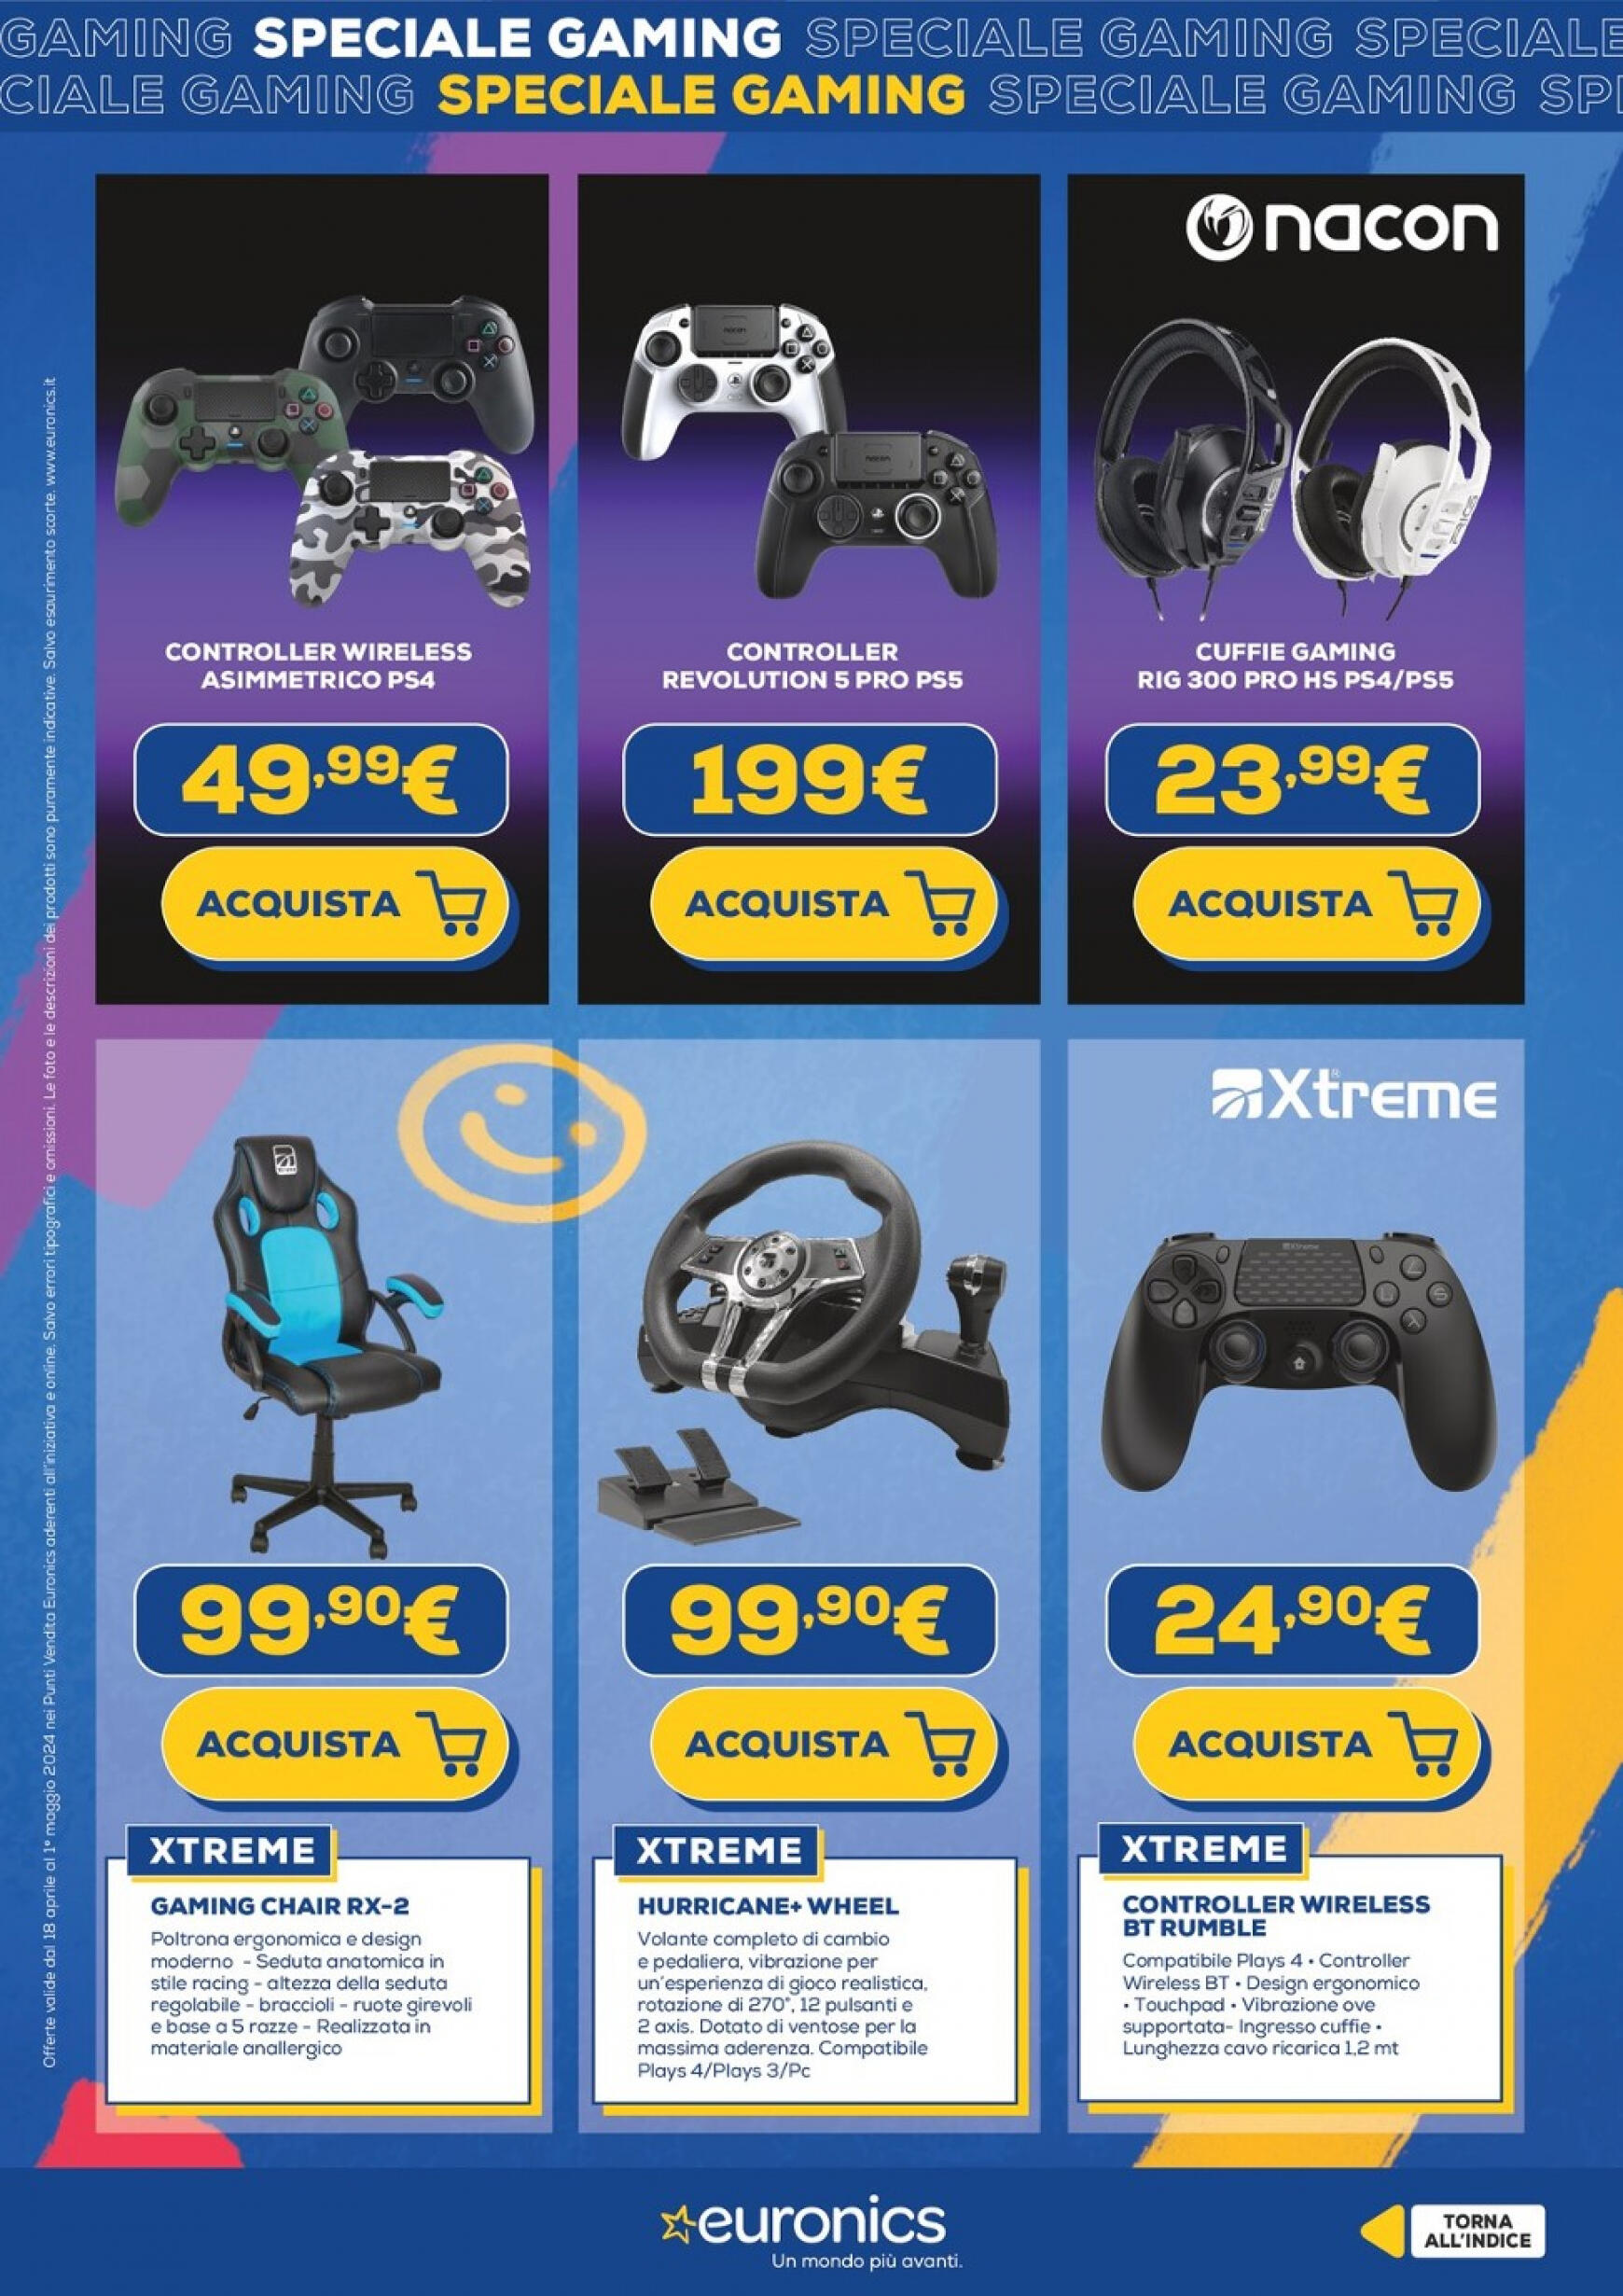 euronics - Nuovo volantino Euronics - Speciale Gaming 18.04. - 01.05. - page: 16